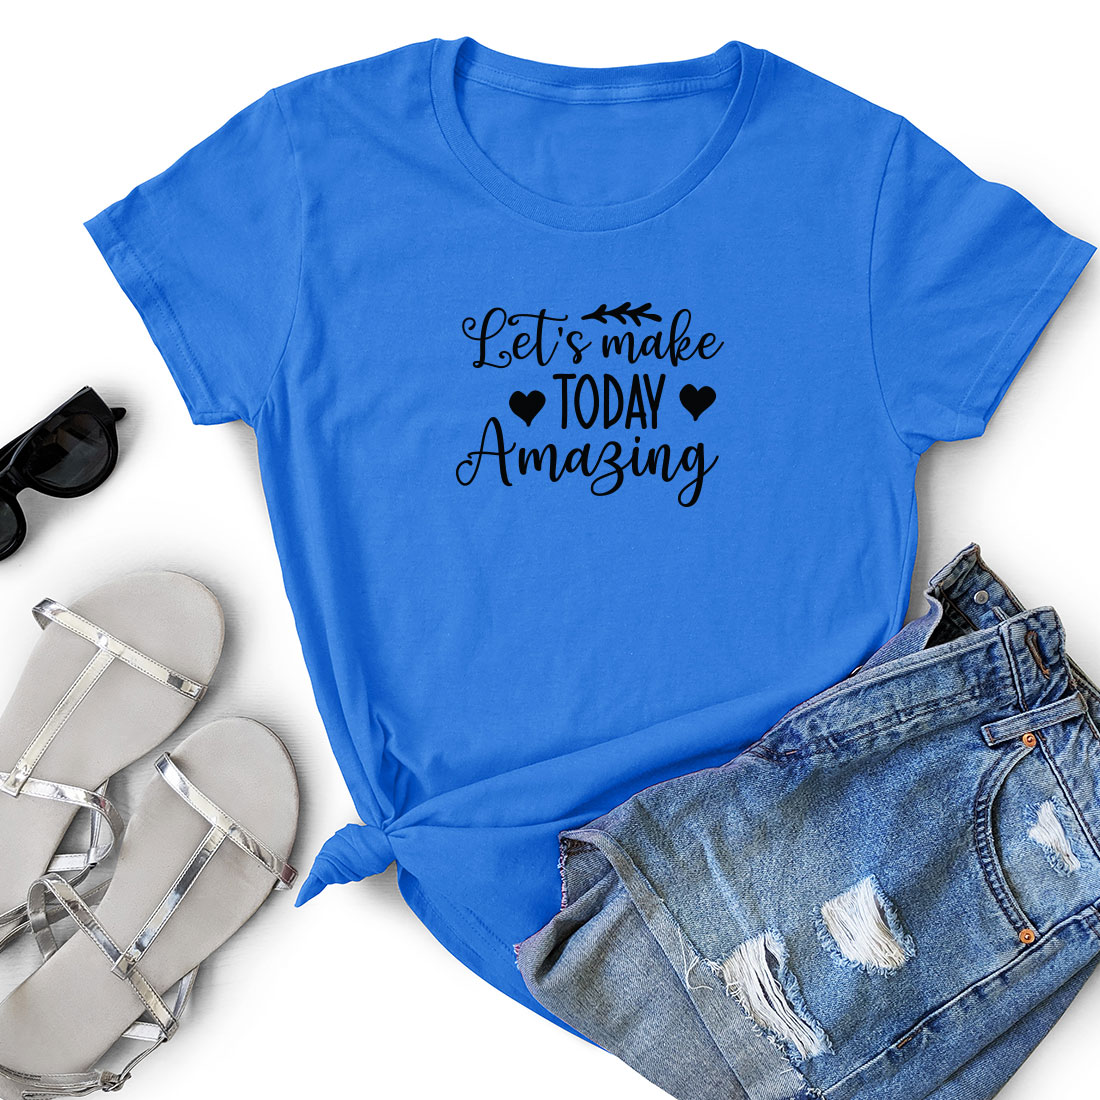 T - shirt that says let's make today amazing.